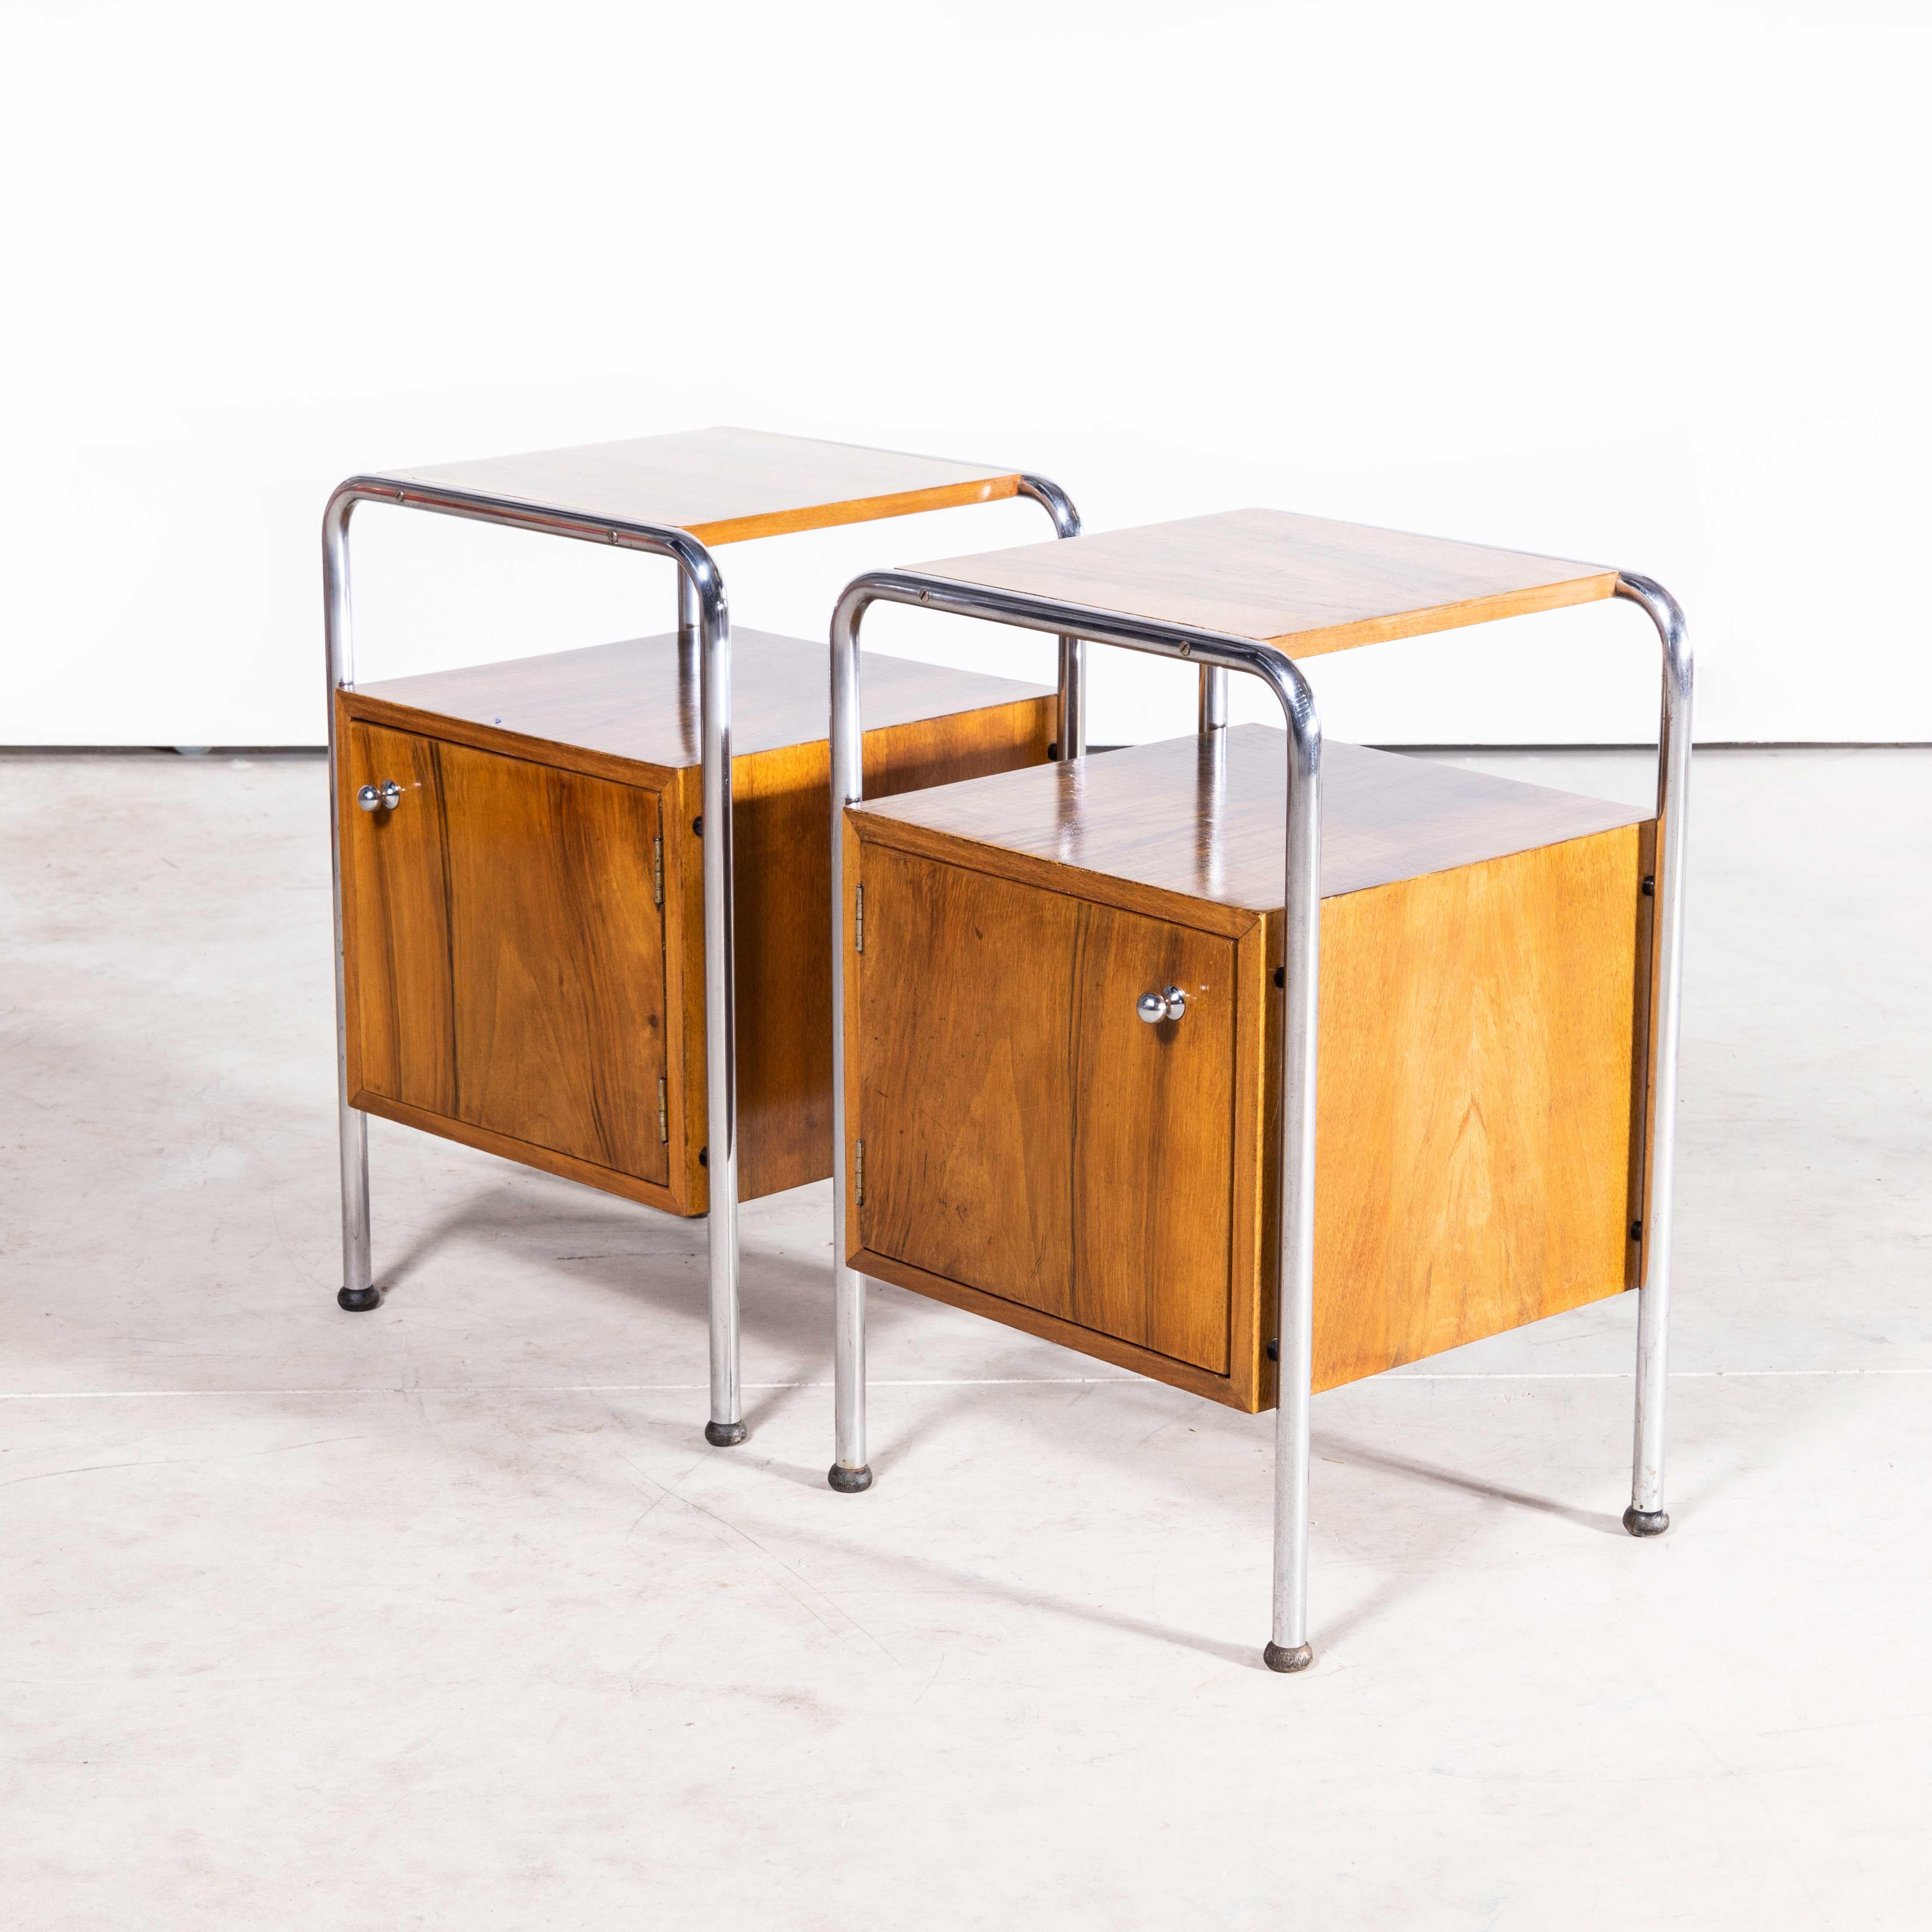 Mid-20th Century 1960s Chrome and Birch Bedside Cabinets, Pair For Sale